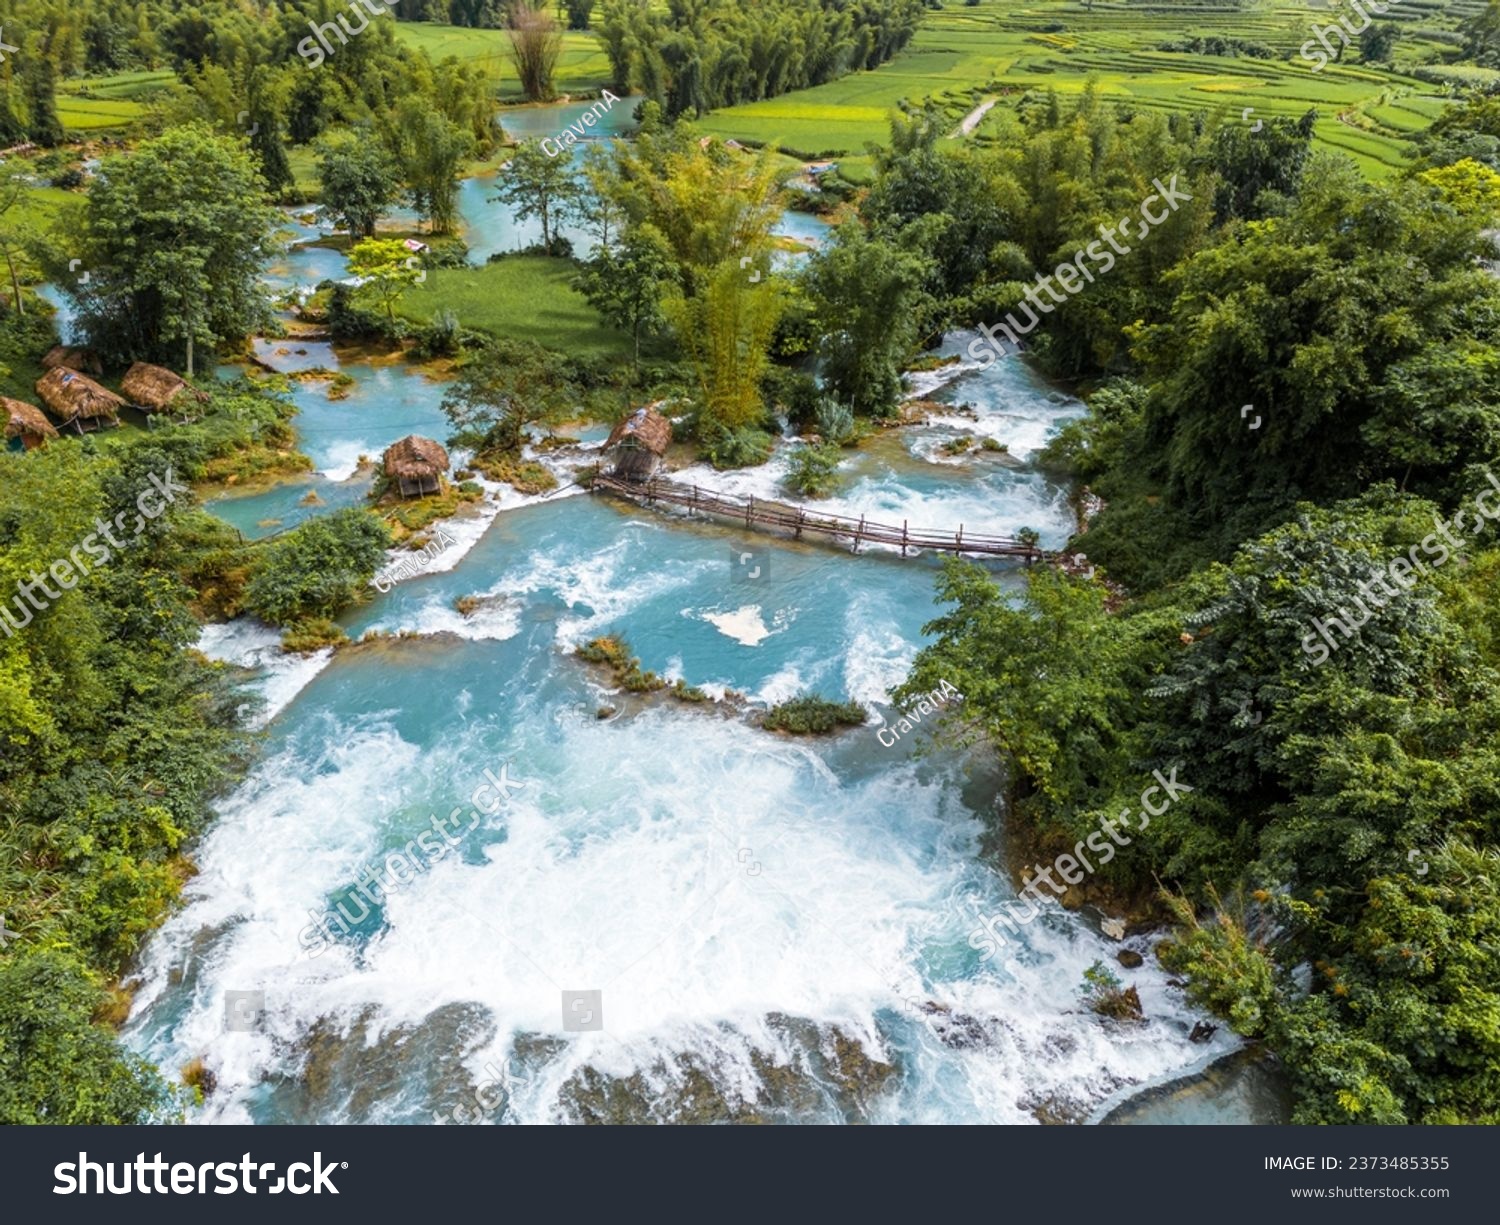 Aerial landscape in Quay Son river, Trung Khanh, Cao Bang, Vietnam with nature, green rice fields and rustic indigenous houses. Travel and landscape concept. #2373485355